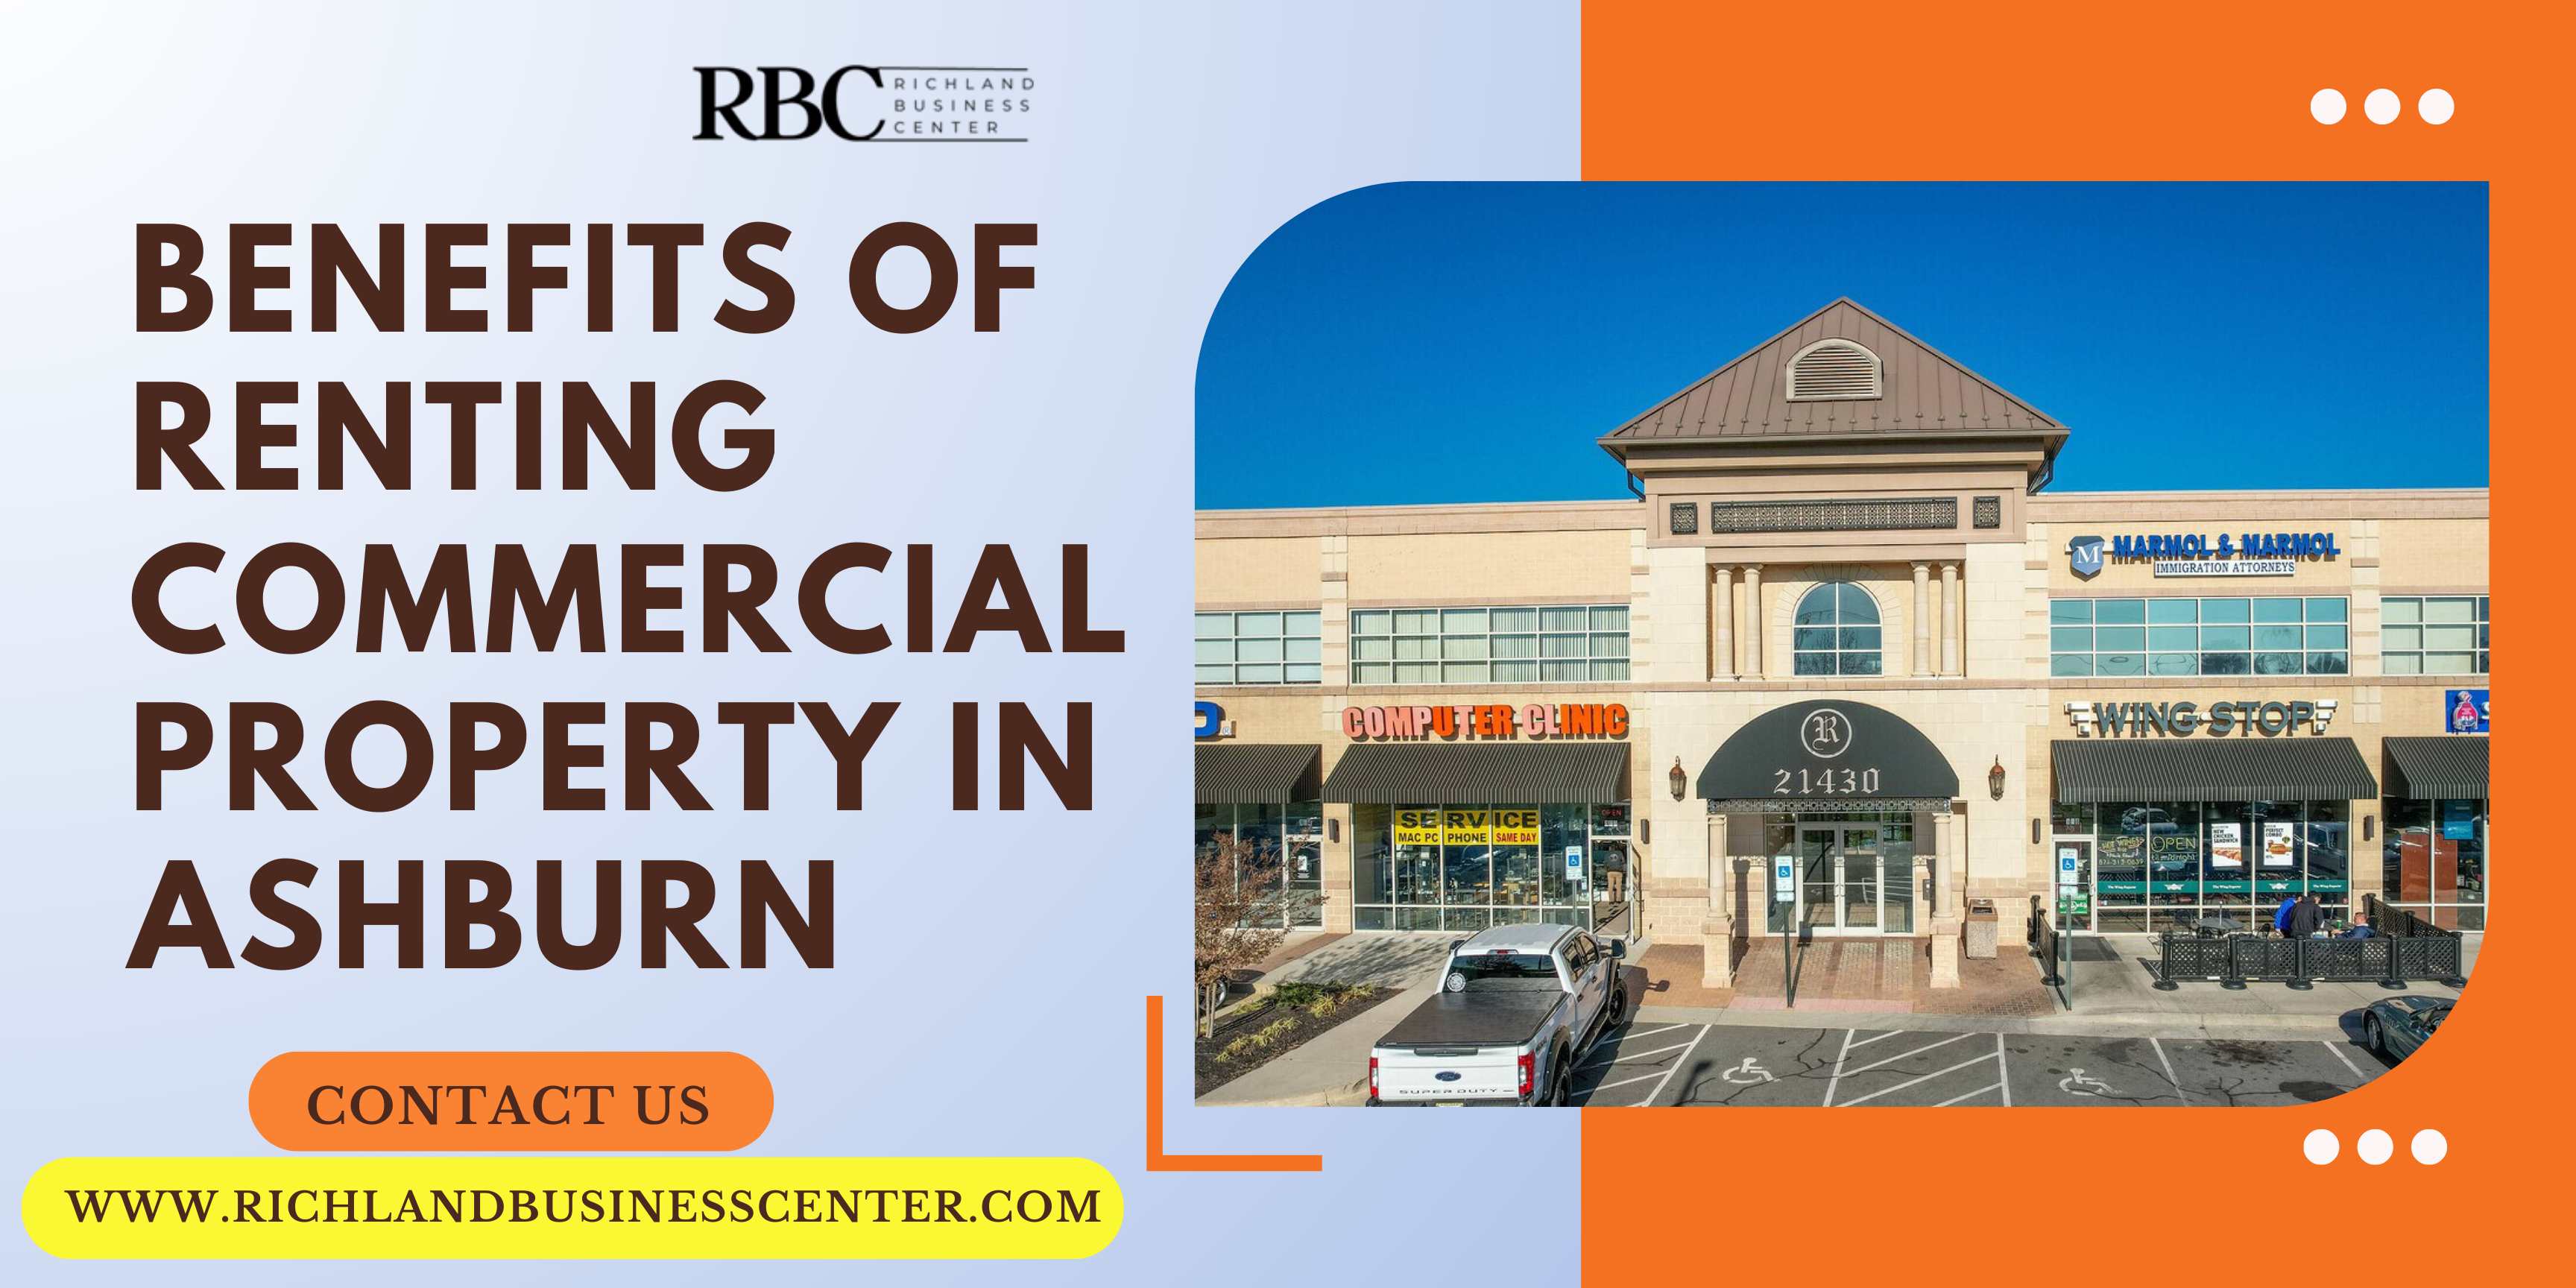 Benefits of Renting Commercial Property near Ashburn